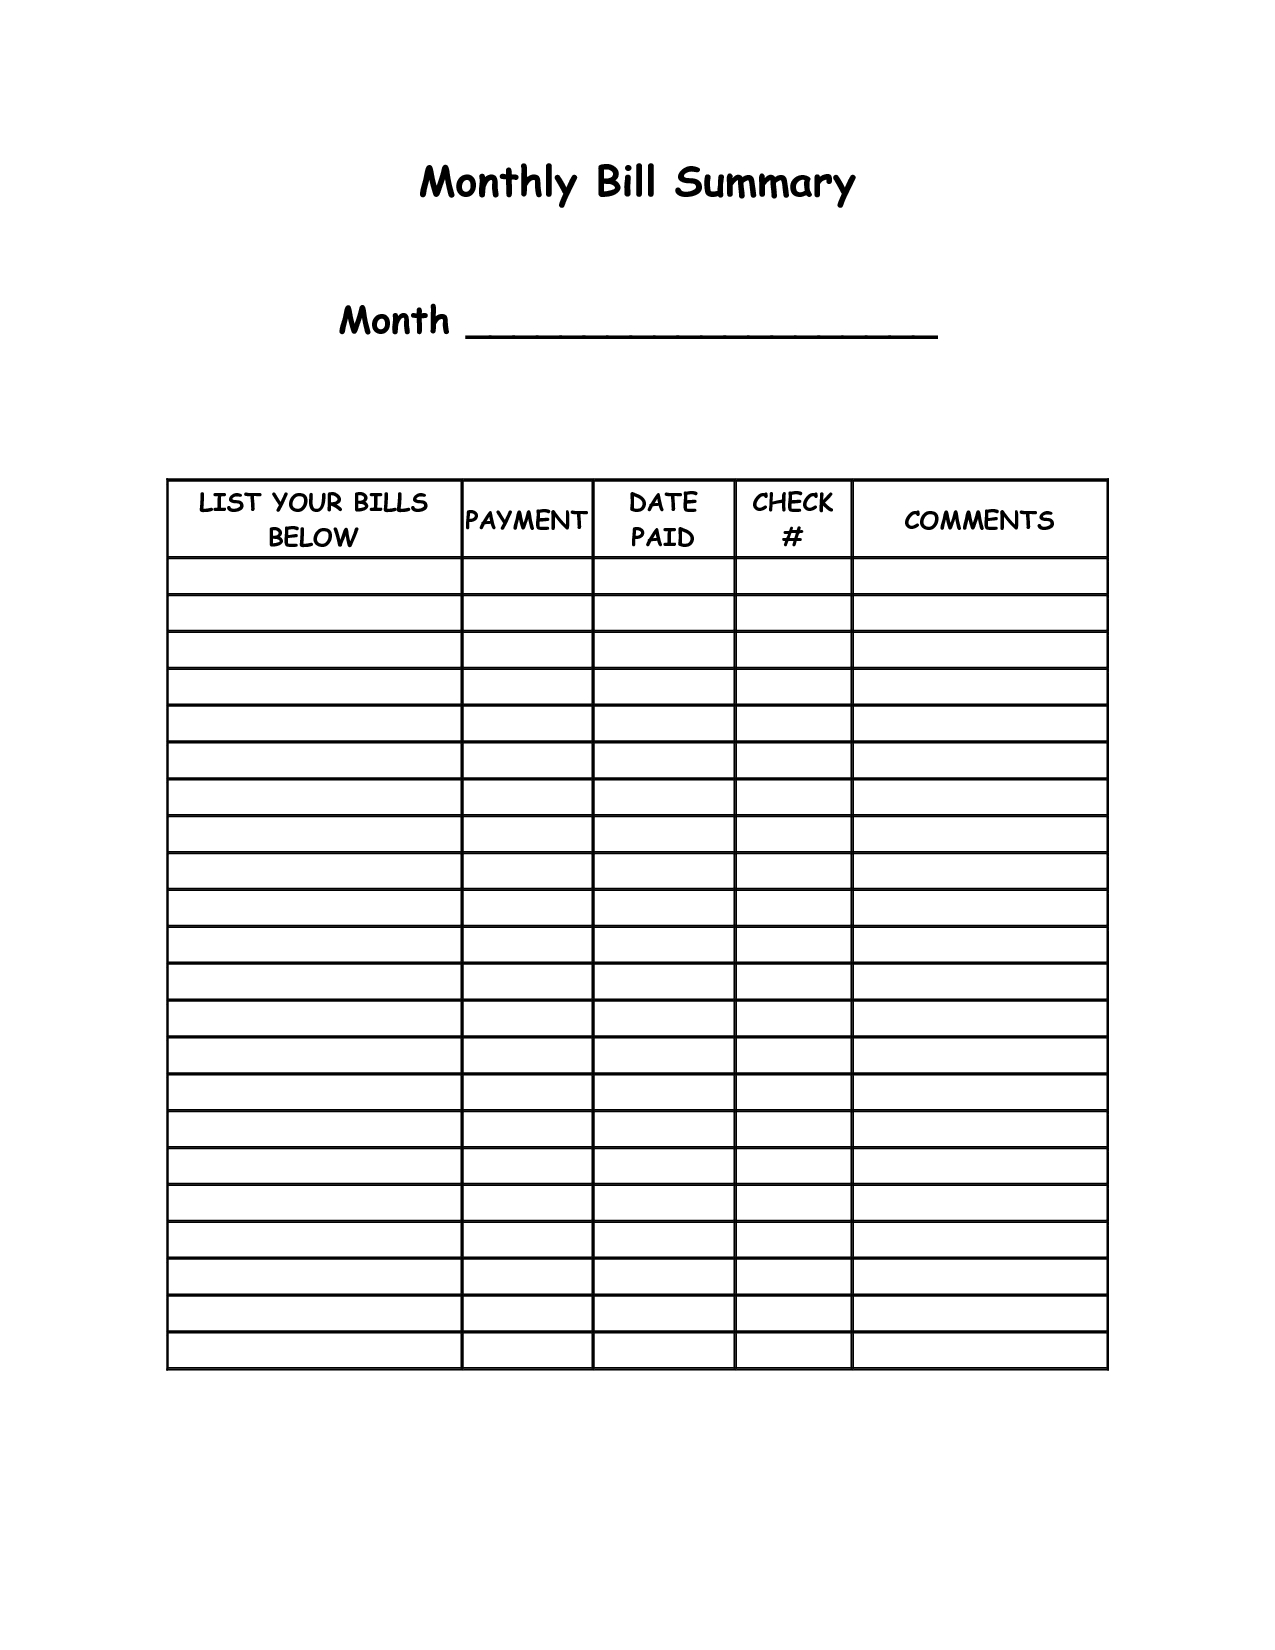 Monthly Bill Summary Doc | Monthly Bill, Organizing Monthly  Bill Payment Sheet